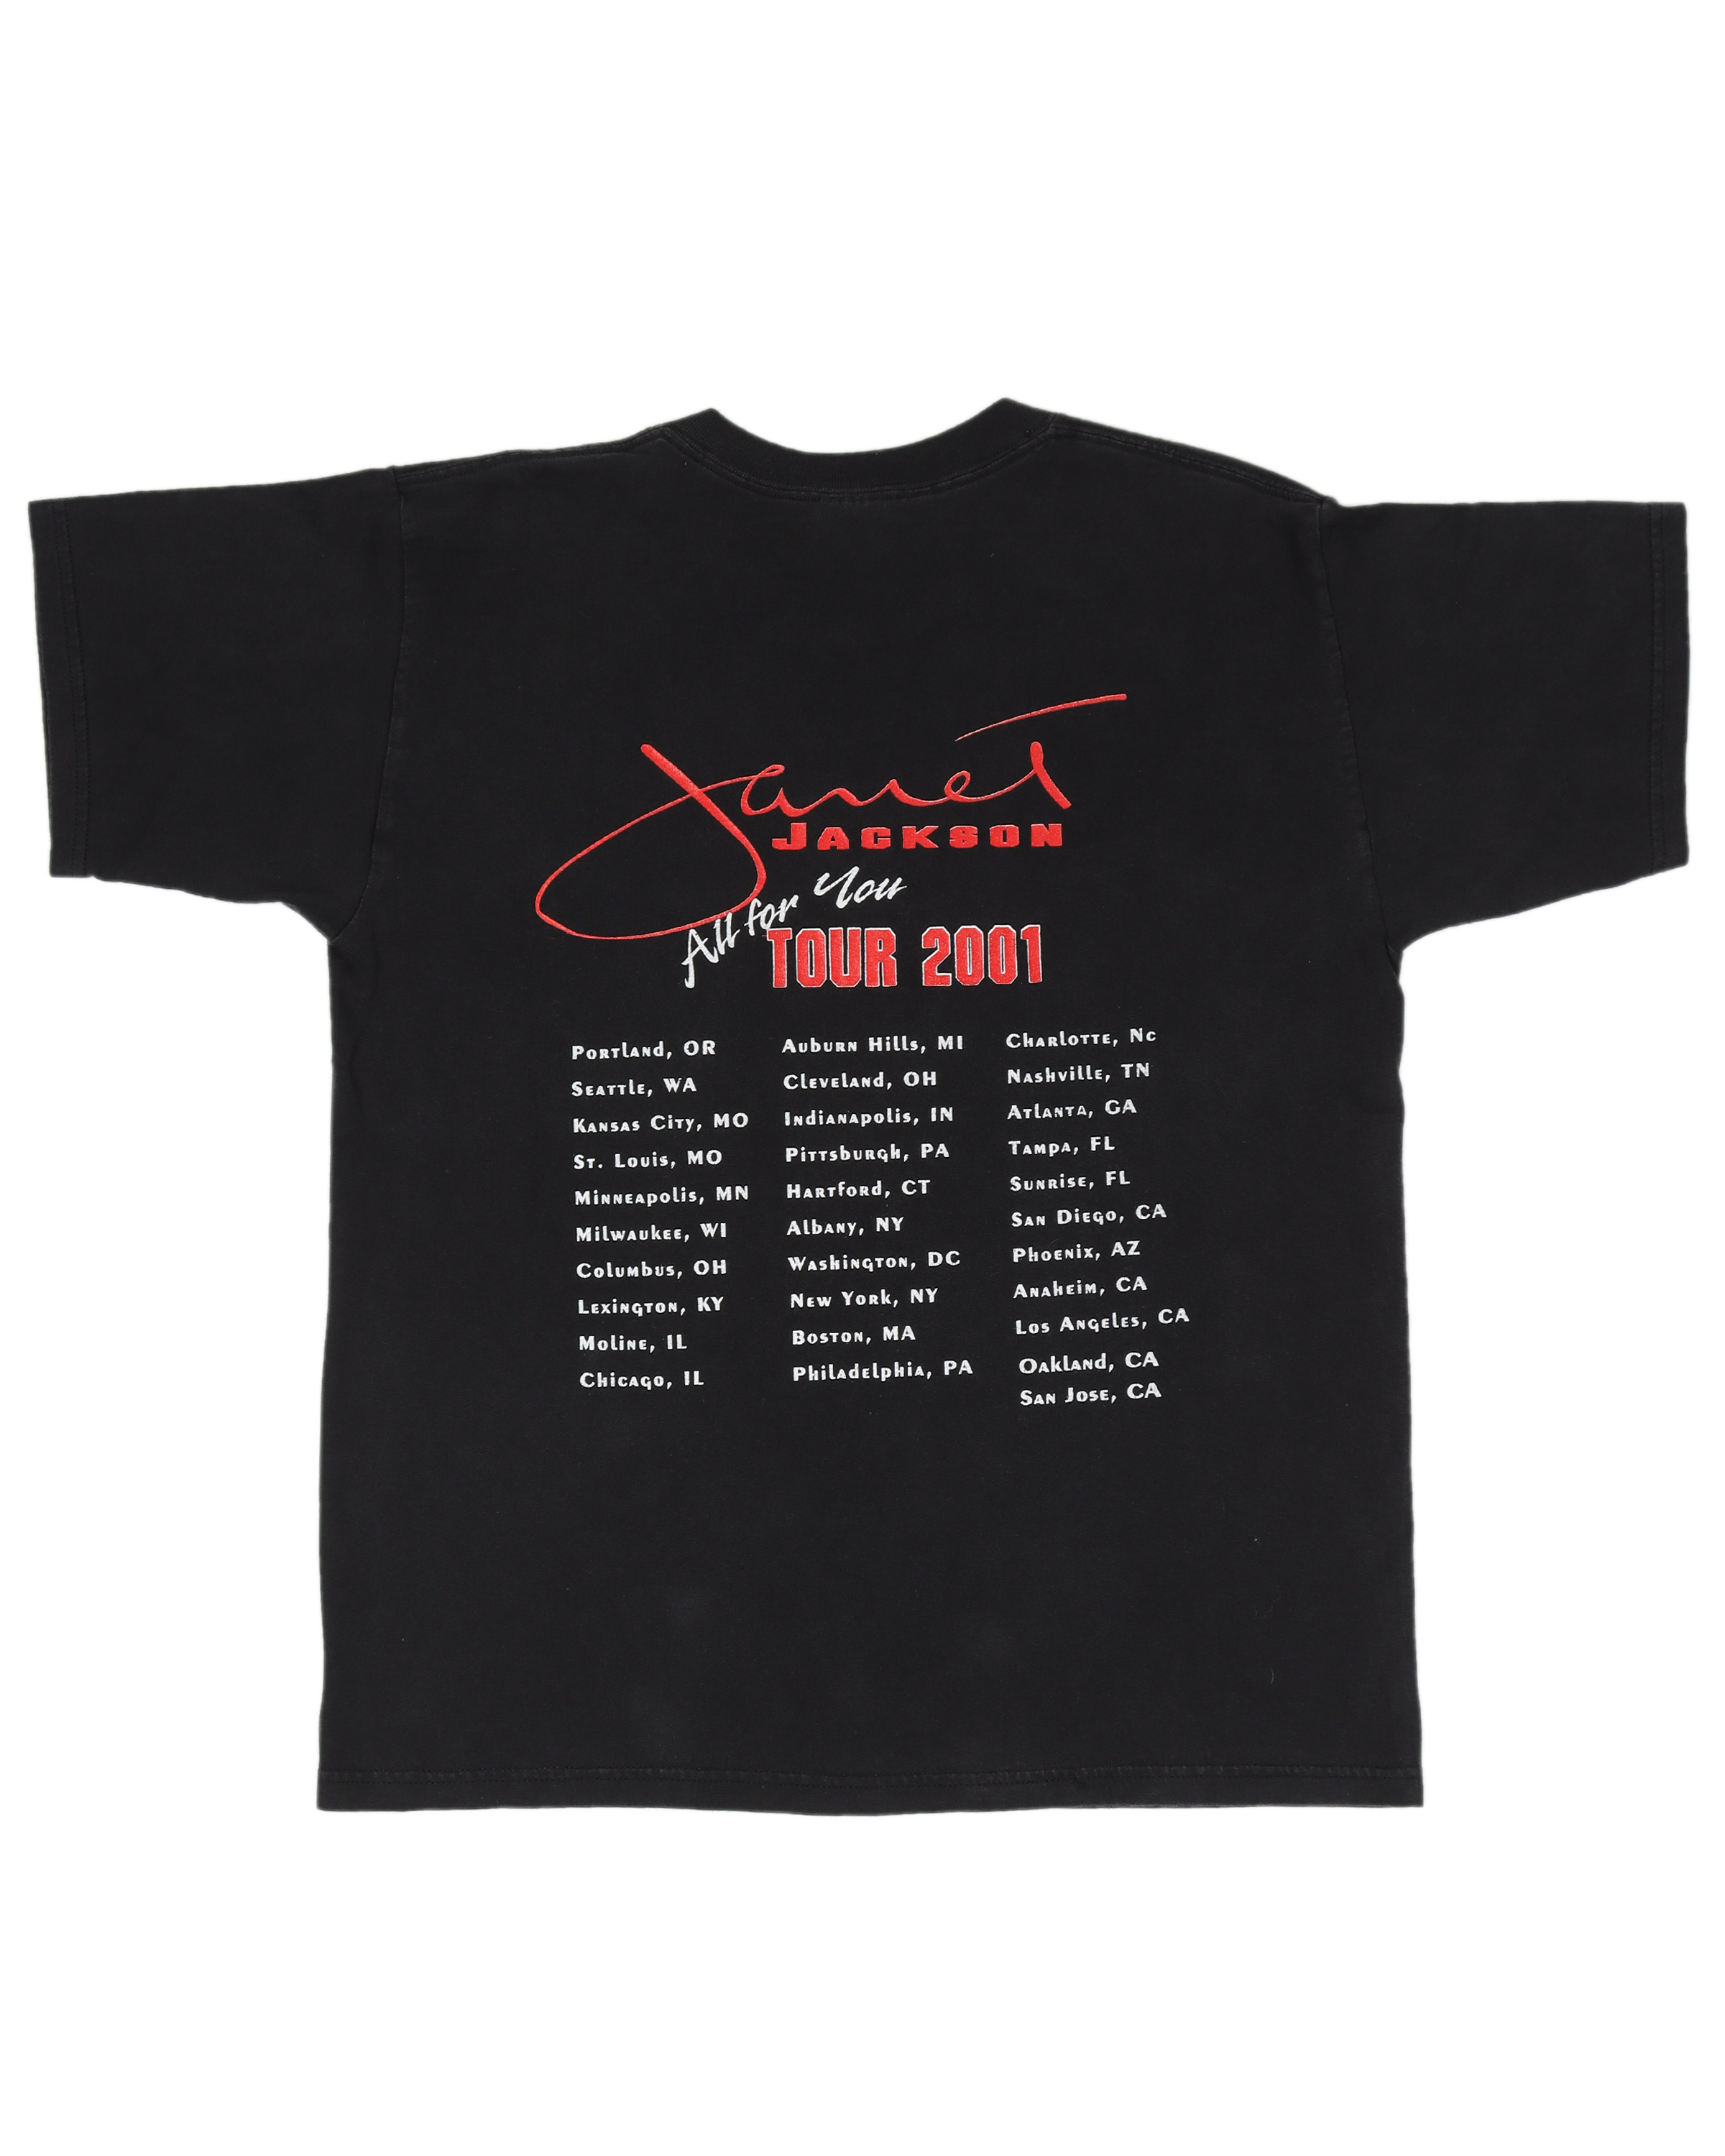 Janet Jackson 'All For You' 2001 Tour T-Shirt